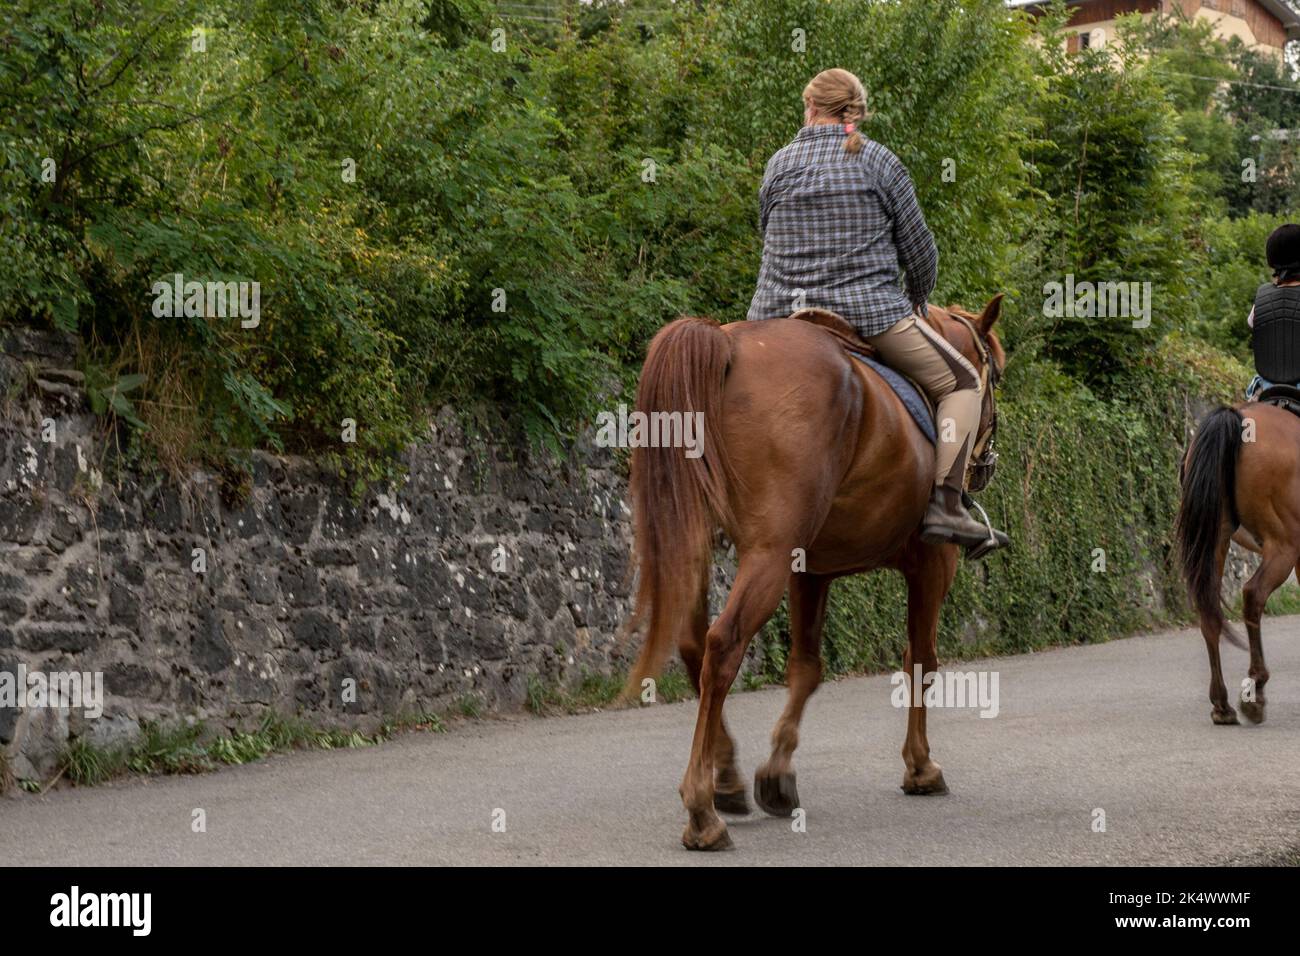 Woman riding a horse in the foreground on the countryside path Stock Photo